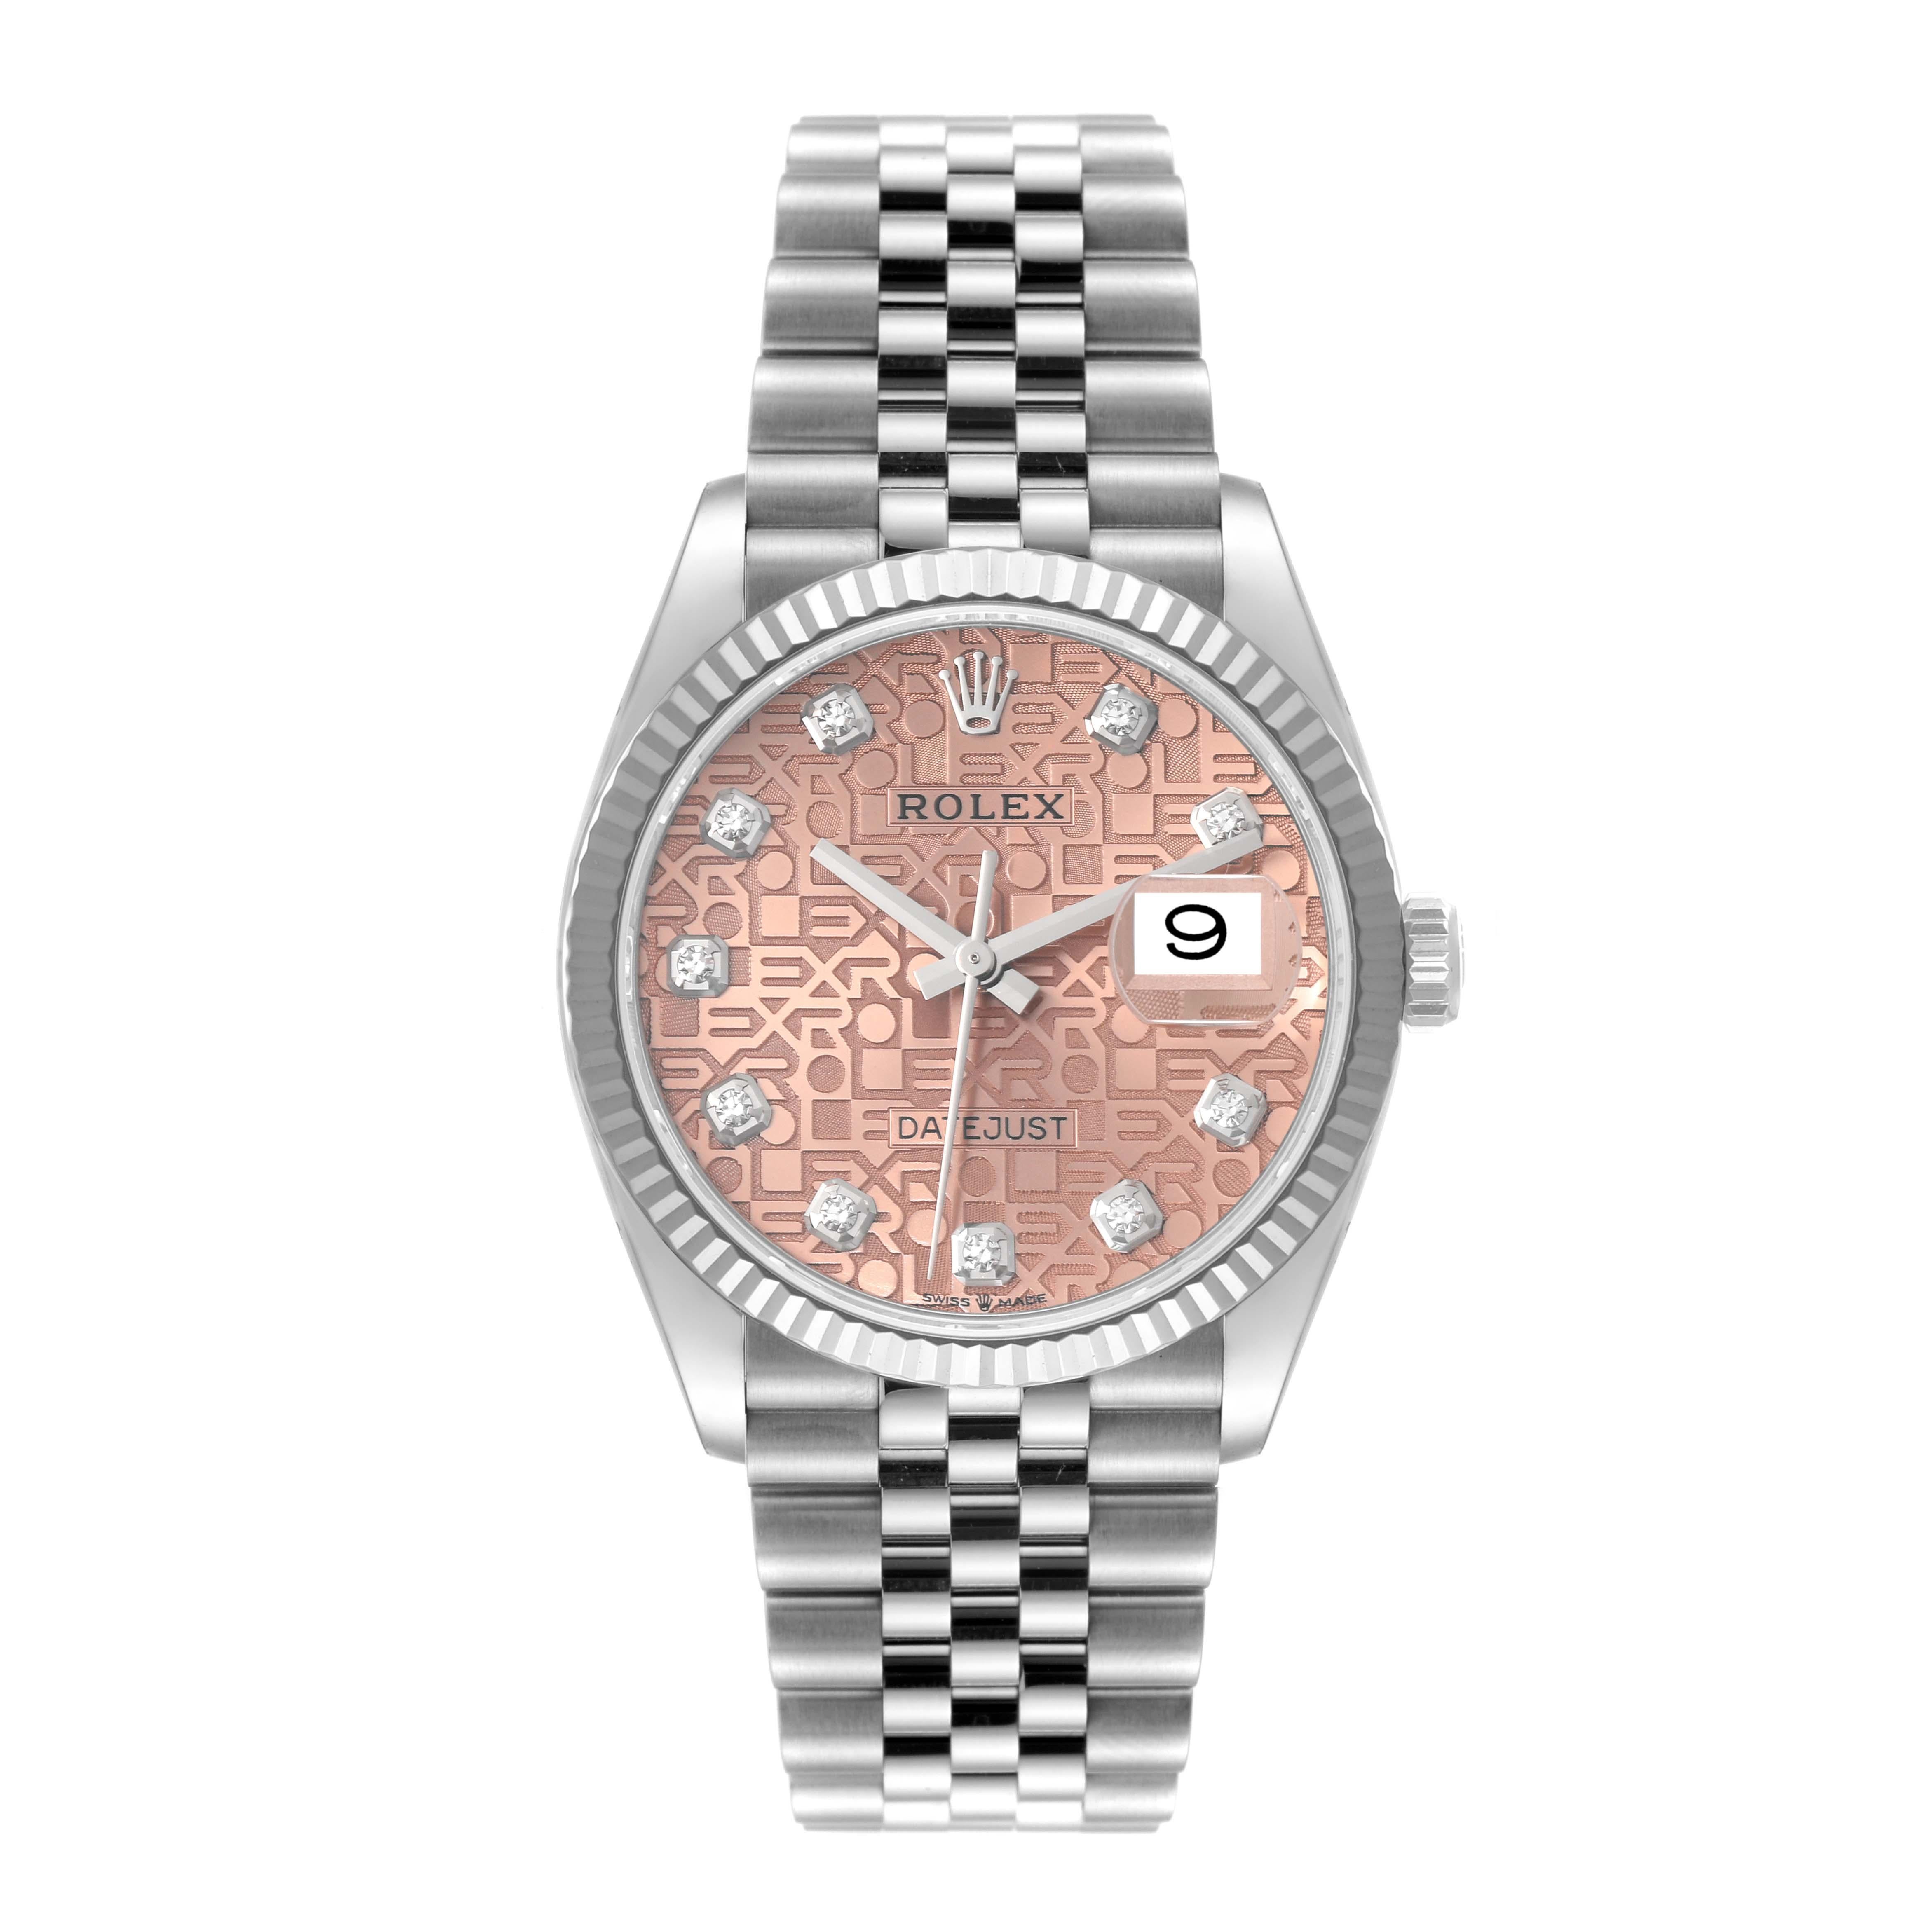 Rolex Datejust Steel White Gold Anniversary Diamond Dial Mens Watch 126234. Officially certified chronometer self-winding movement. Stainless steel case 36.0 mm in diameter.  Rolex logo on a crown. 18K white gold fluted bezel. Scratch resistant